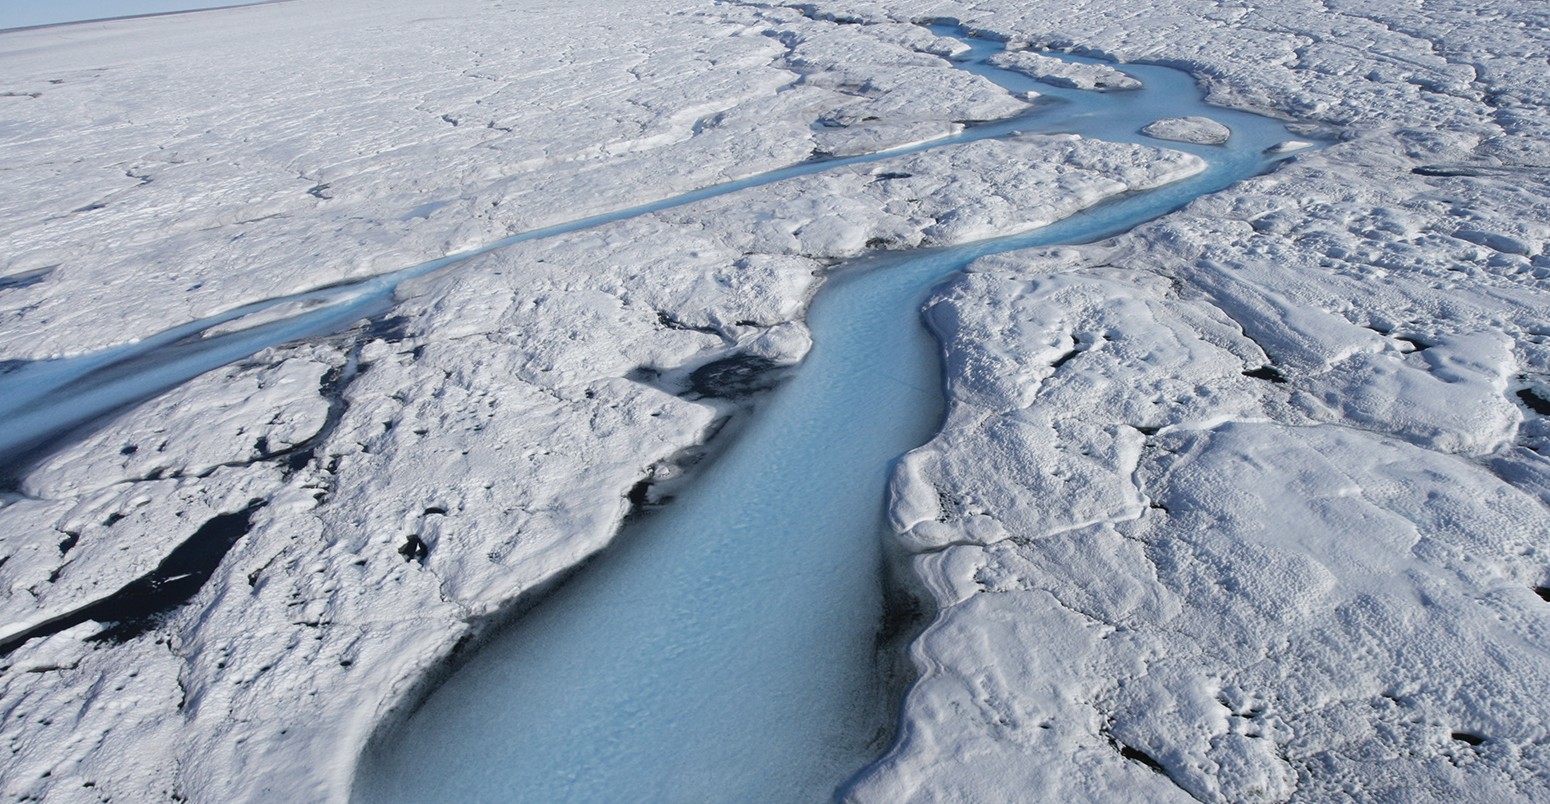 Melting ice forms rivers across the Sermeq Kujalleq Glacier